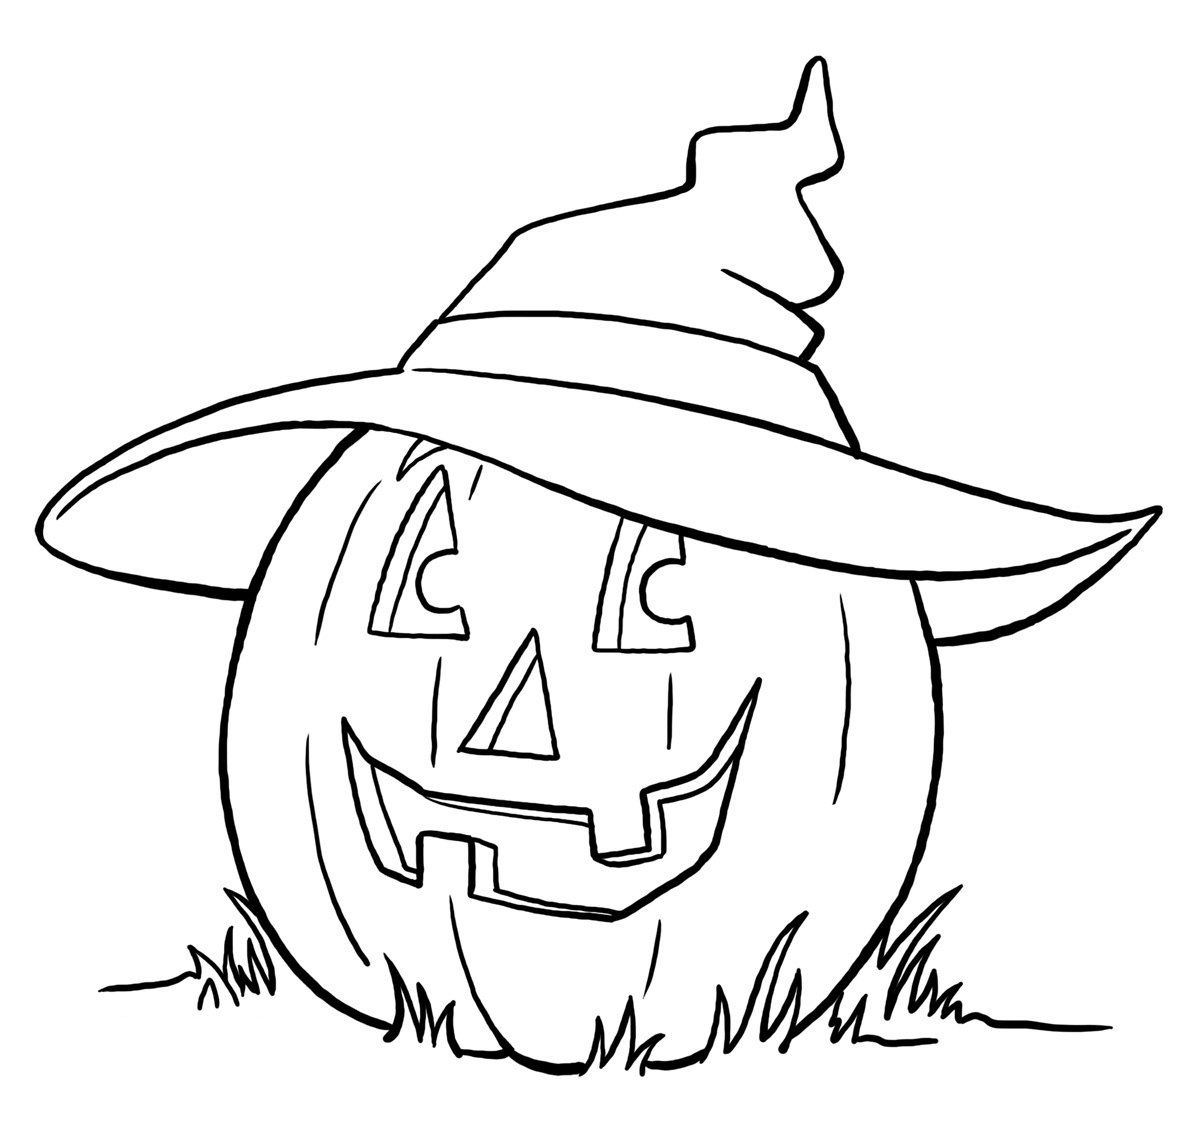 Printable Halloween Pumpkin Coloring Pages At Getcolorings.com | Free